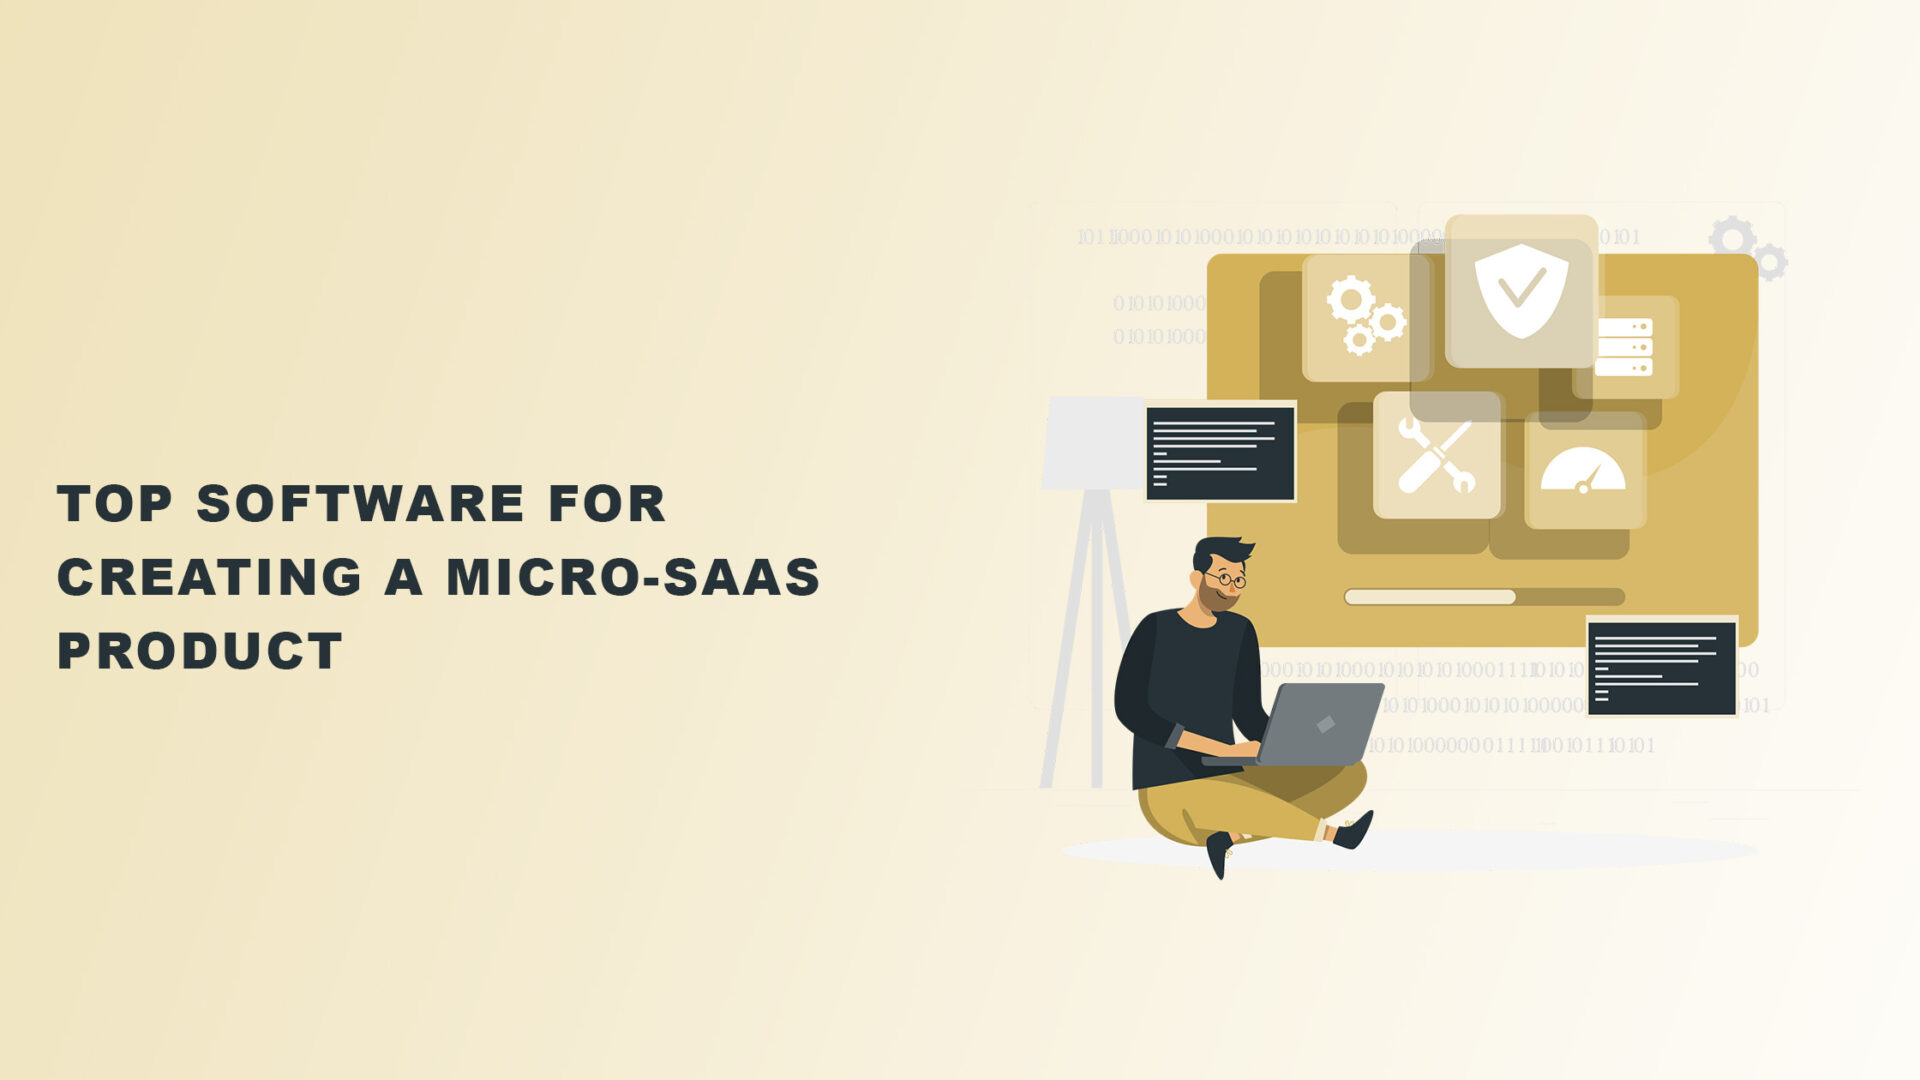 Top Software for Creating a Micro-SaaS Product